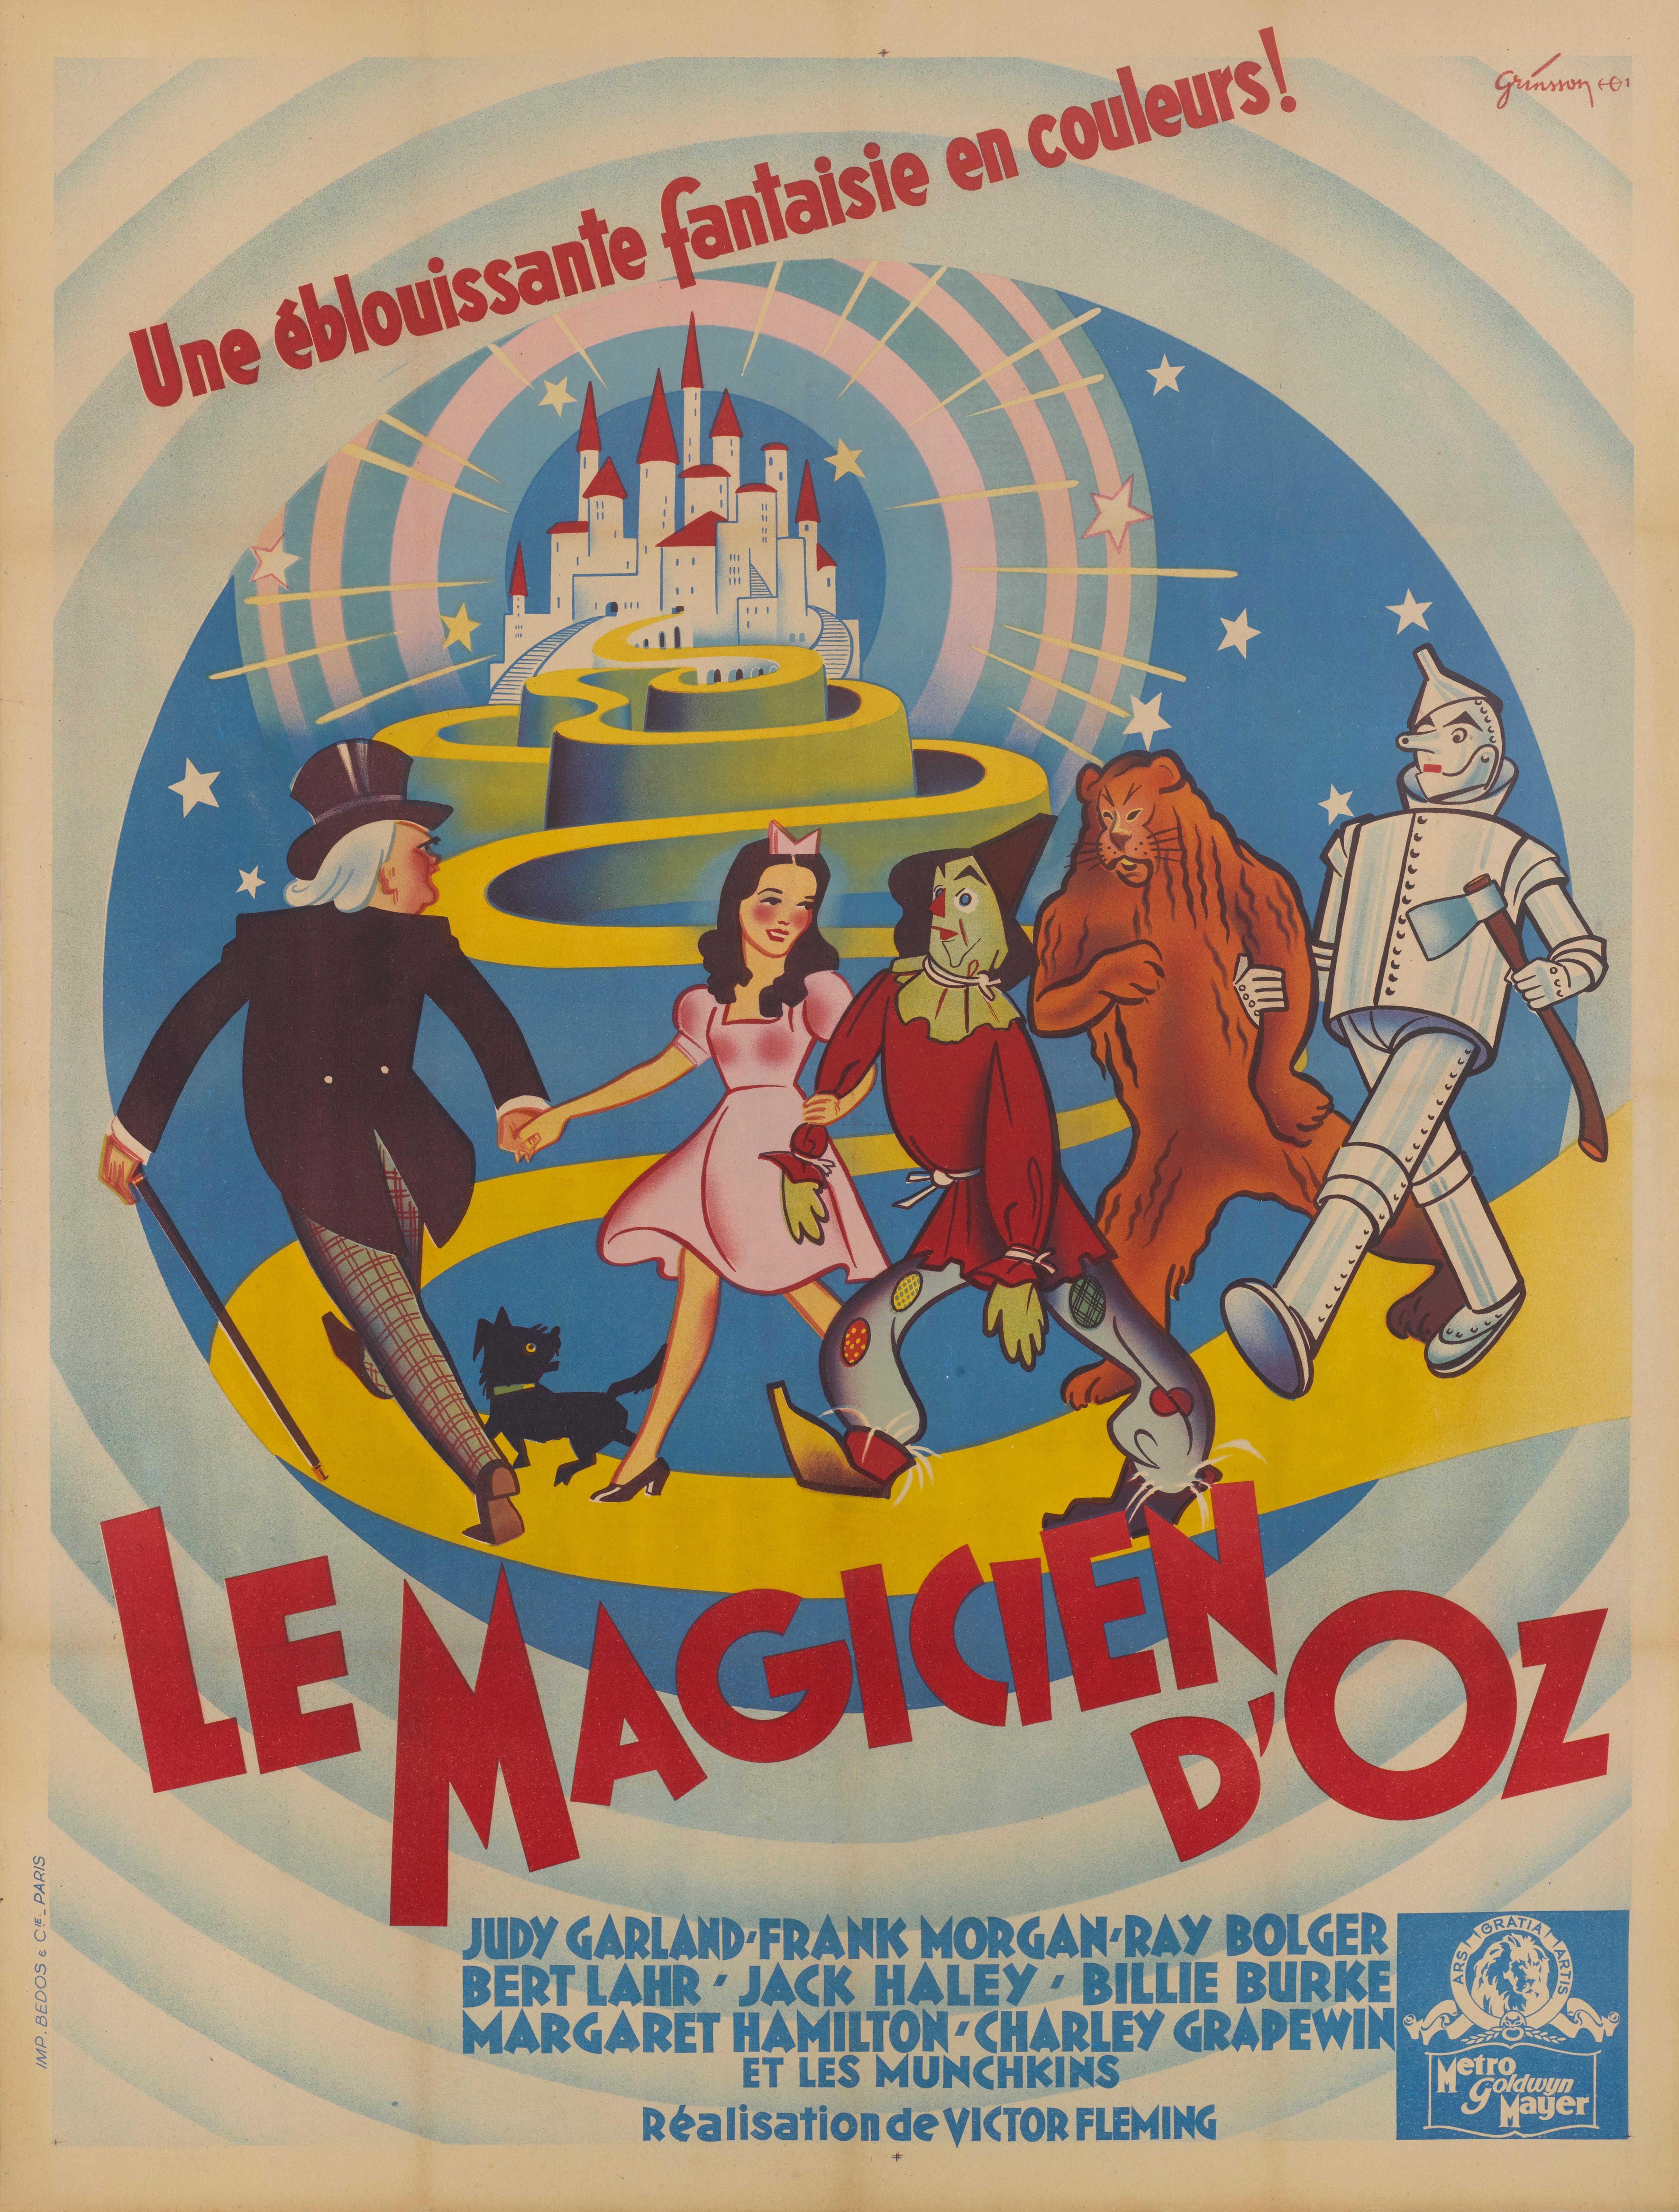 Original French film poster for the Classic (1939) film.
Due to World War II the film was not released in France until after the war in 1946.
Few films have enjoyed such enduring popularity as the 1939 adaptation of L. Frank Baum's children's